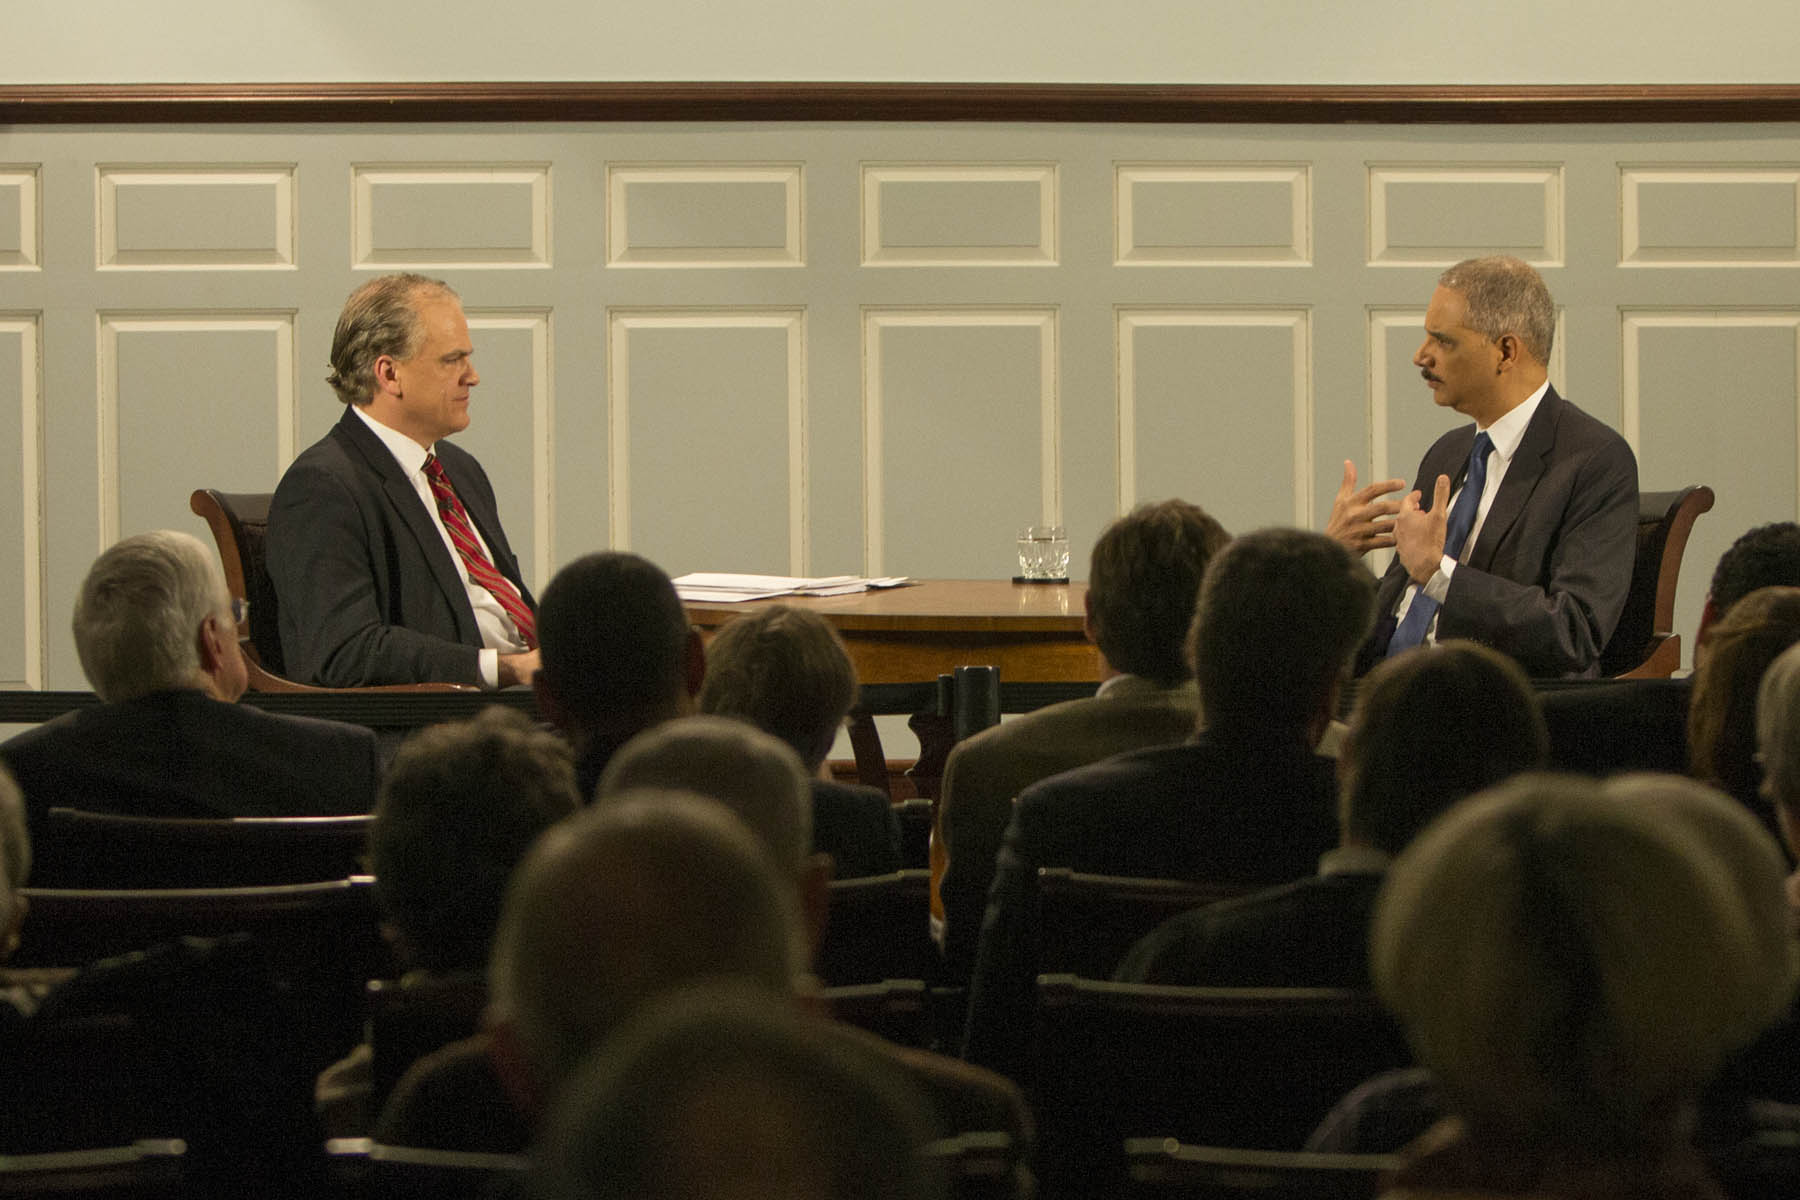 Douglas Blackmon (left) interviewing Attorney General Eric Holder (right) in front of a crowd